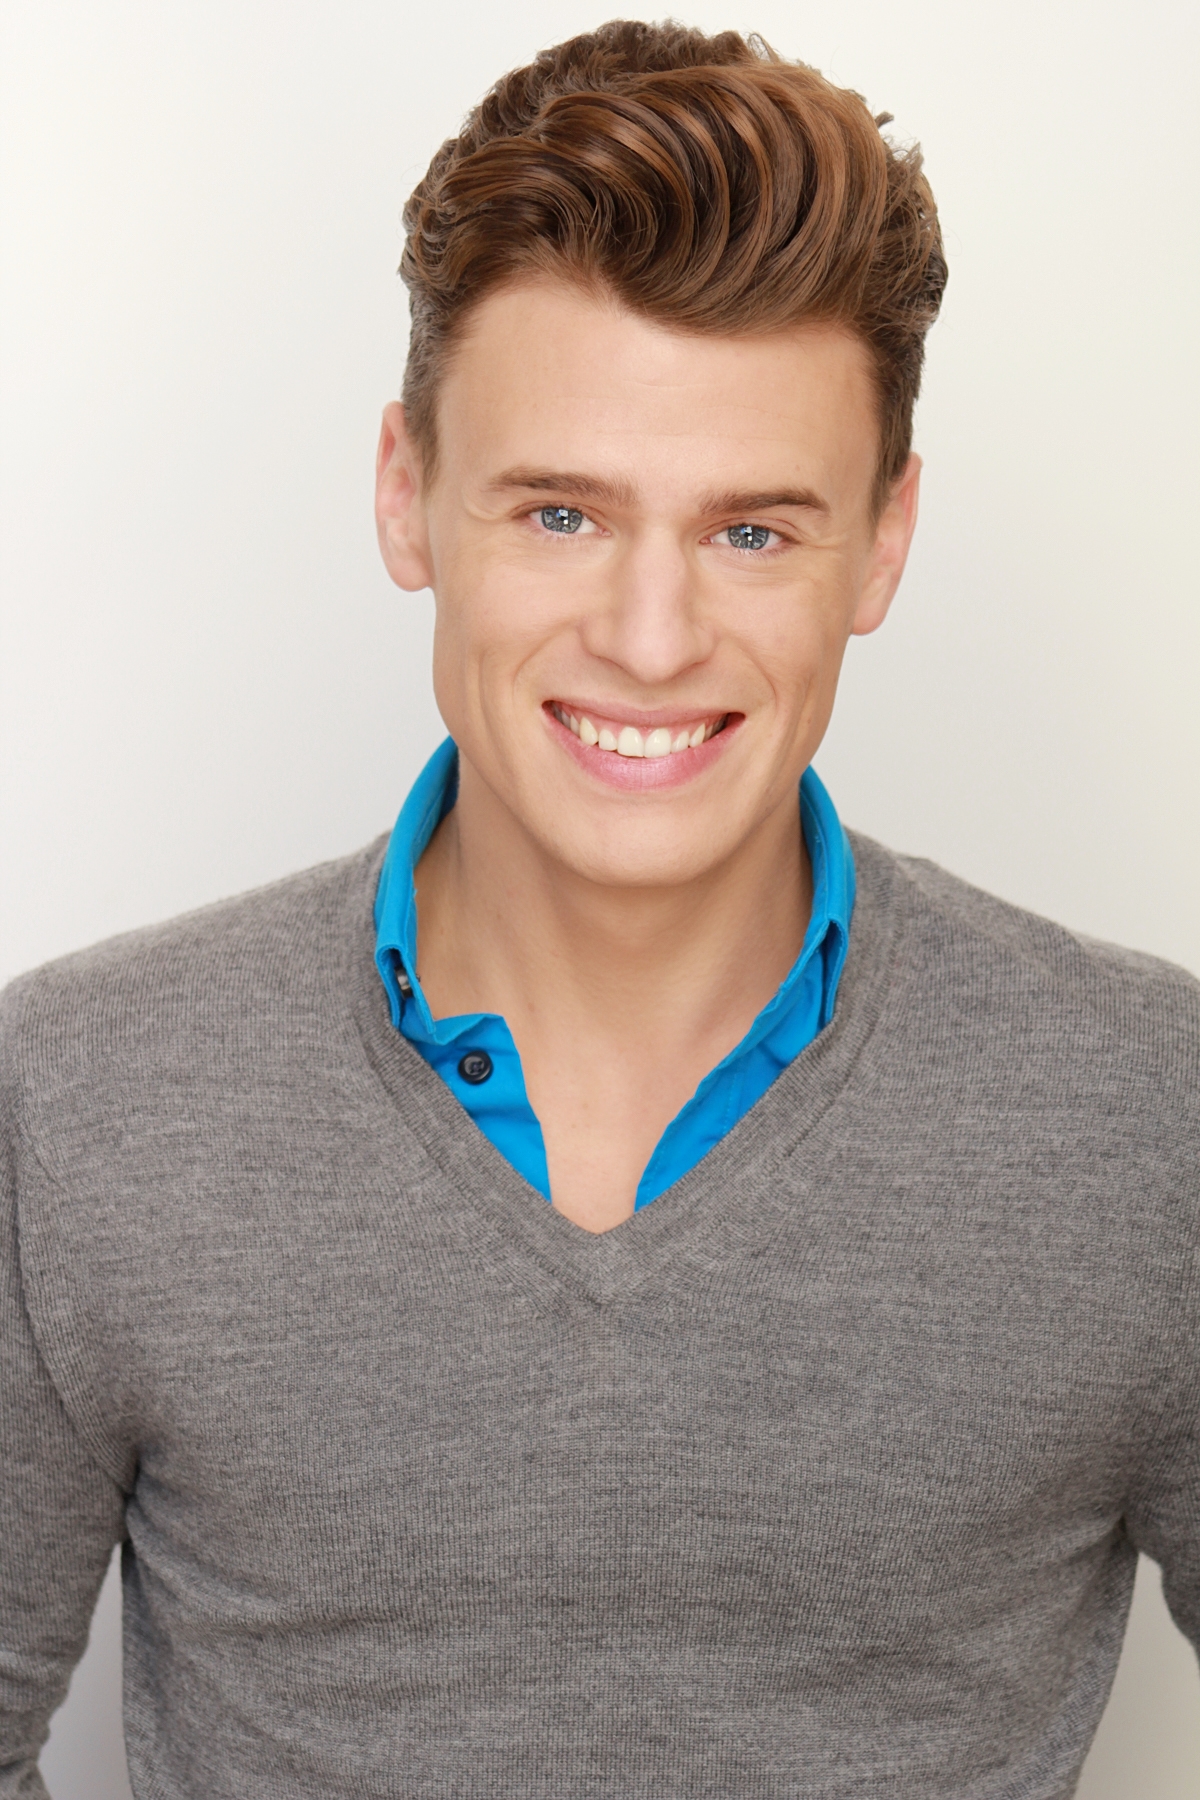 ← Blake McIver Ewing pictures.